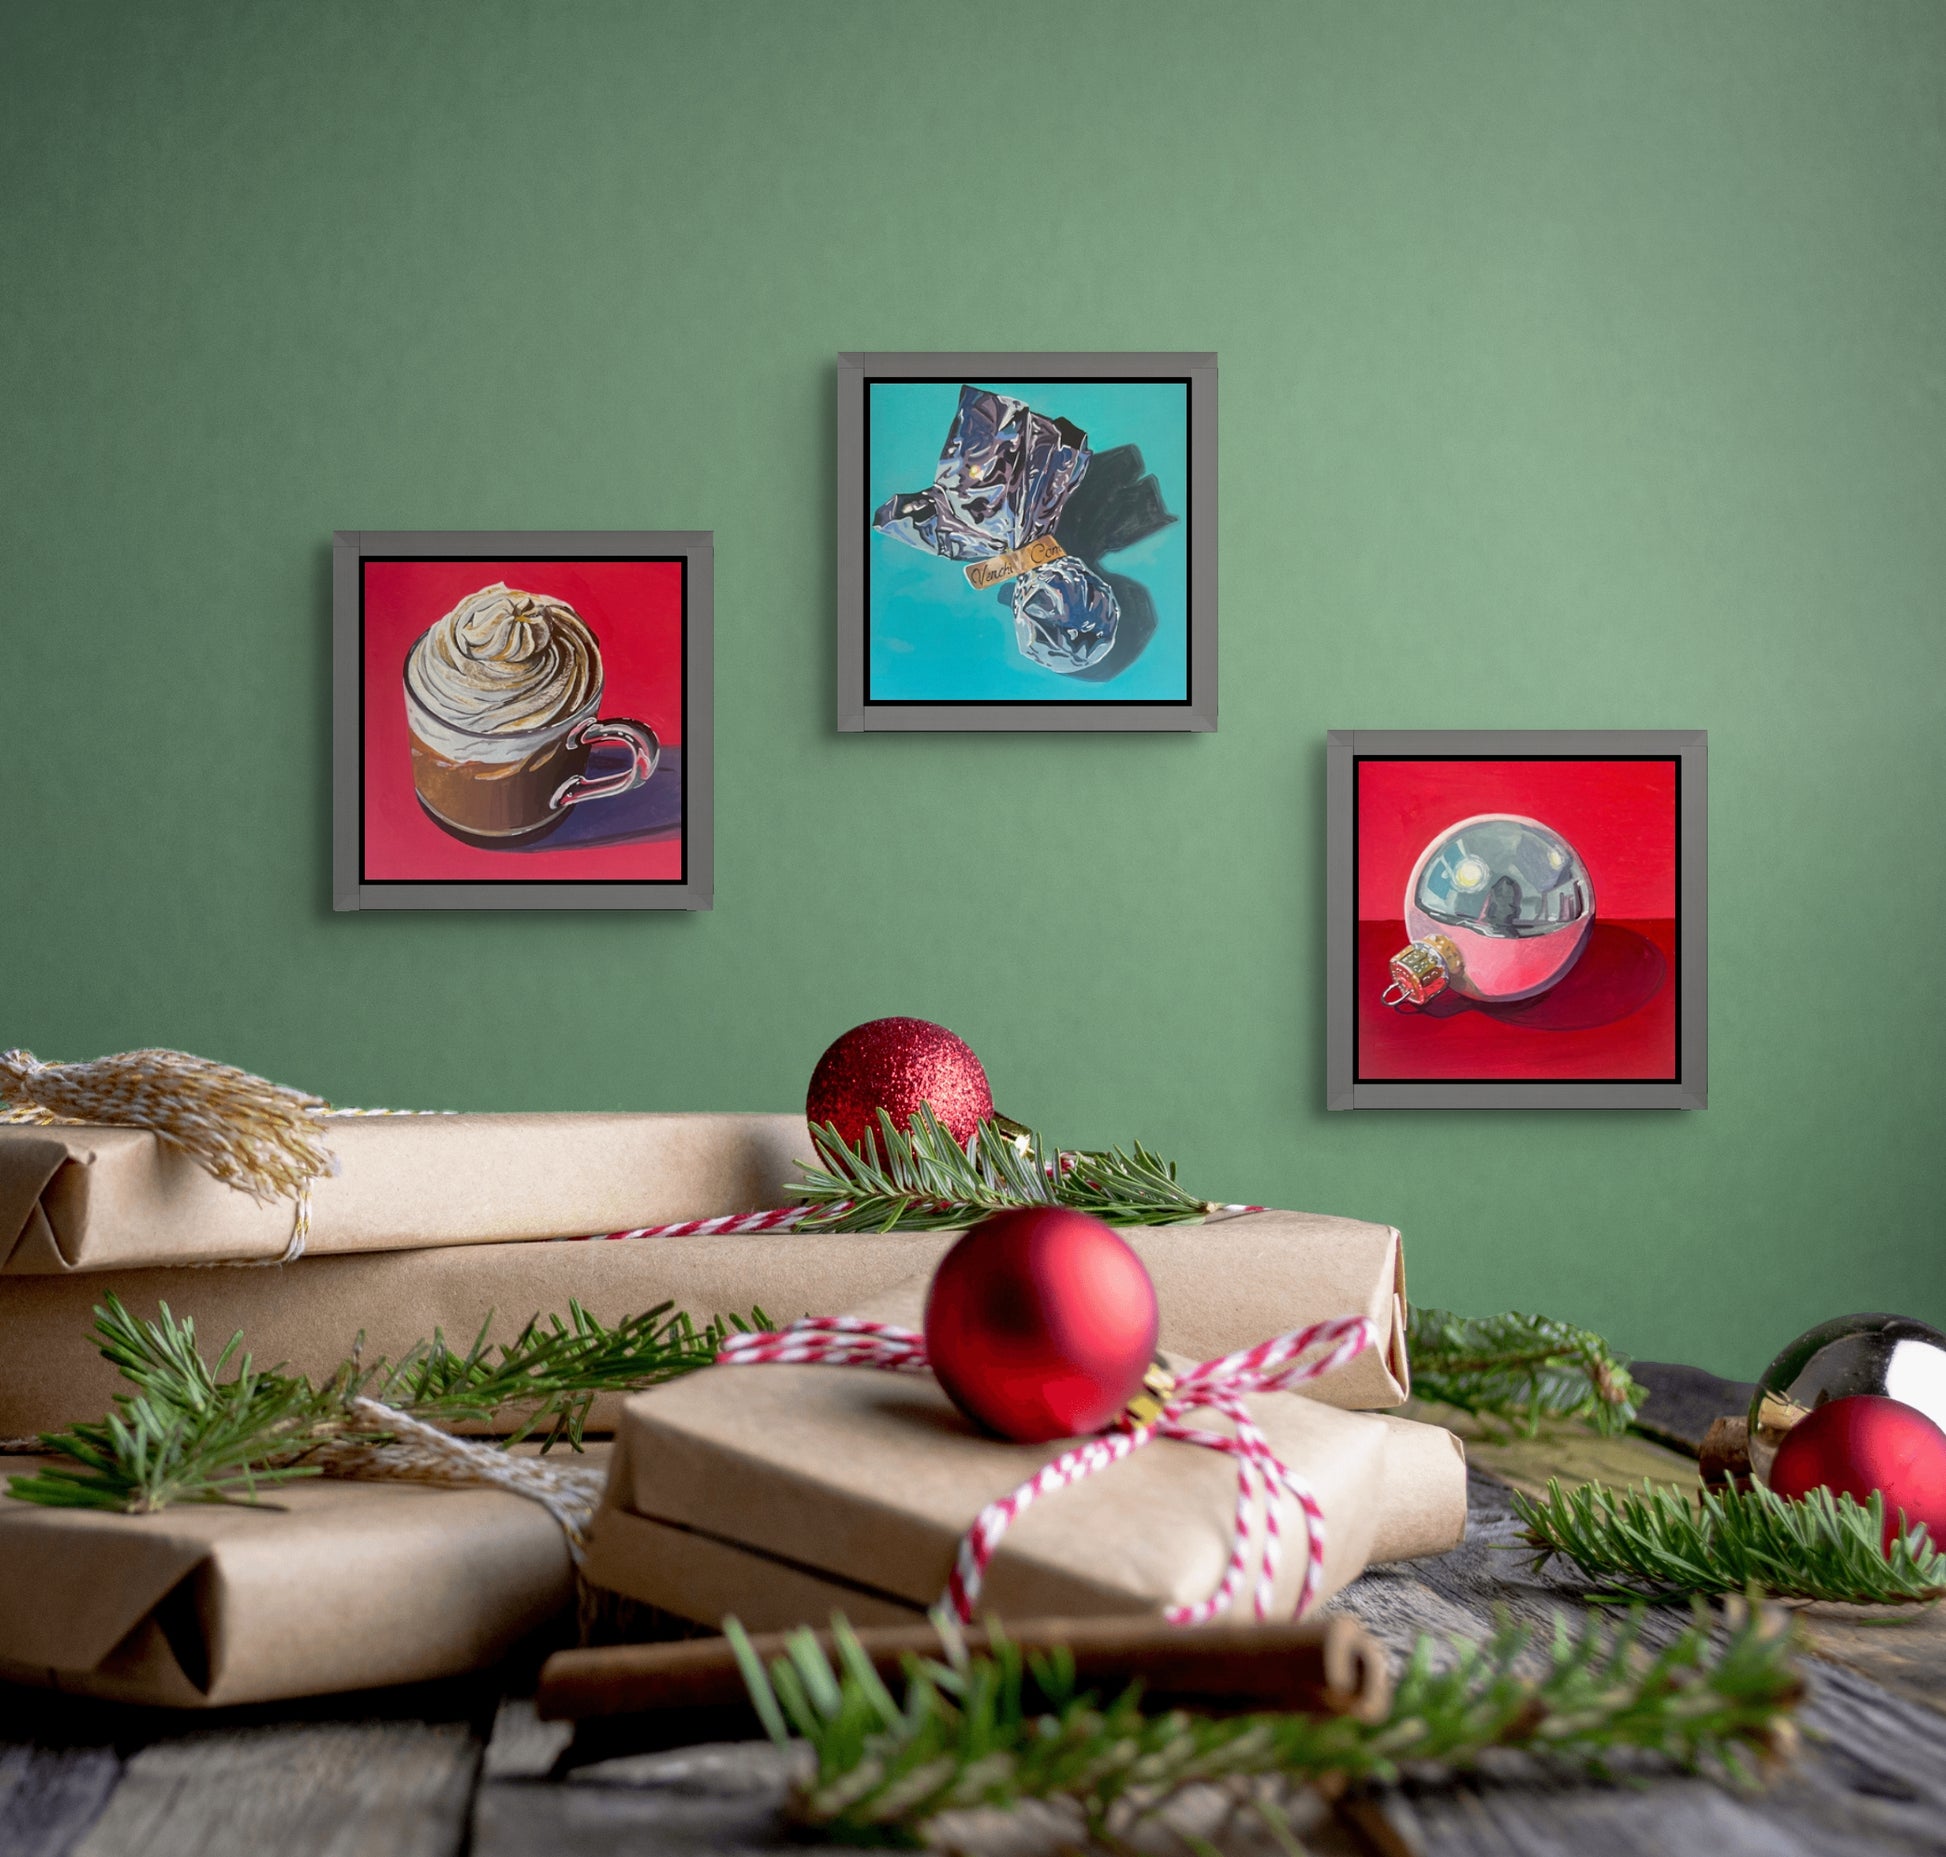 Silver tree ornament with a blue reflection on a brilliant red and orange background; artist Kate Jarvik Birch; 6"Wx6"H; shown in frame in situ with two other small holiday paintings;